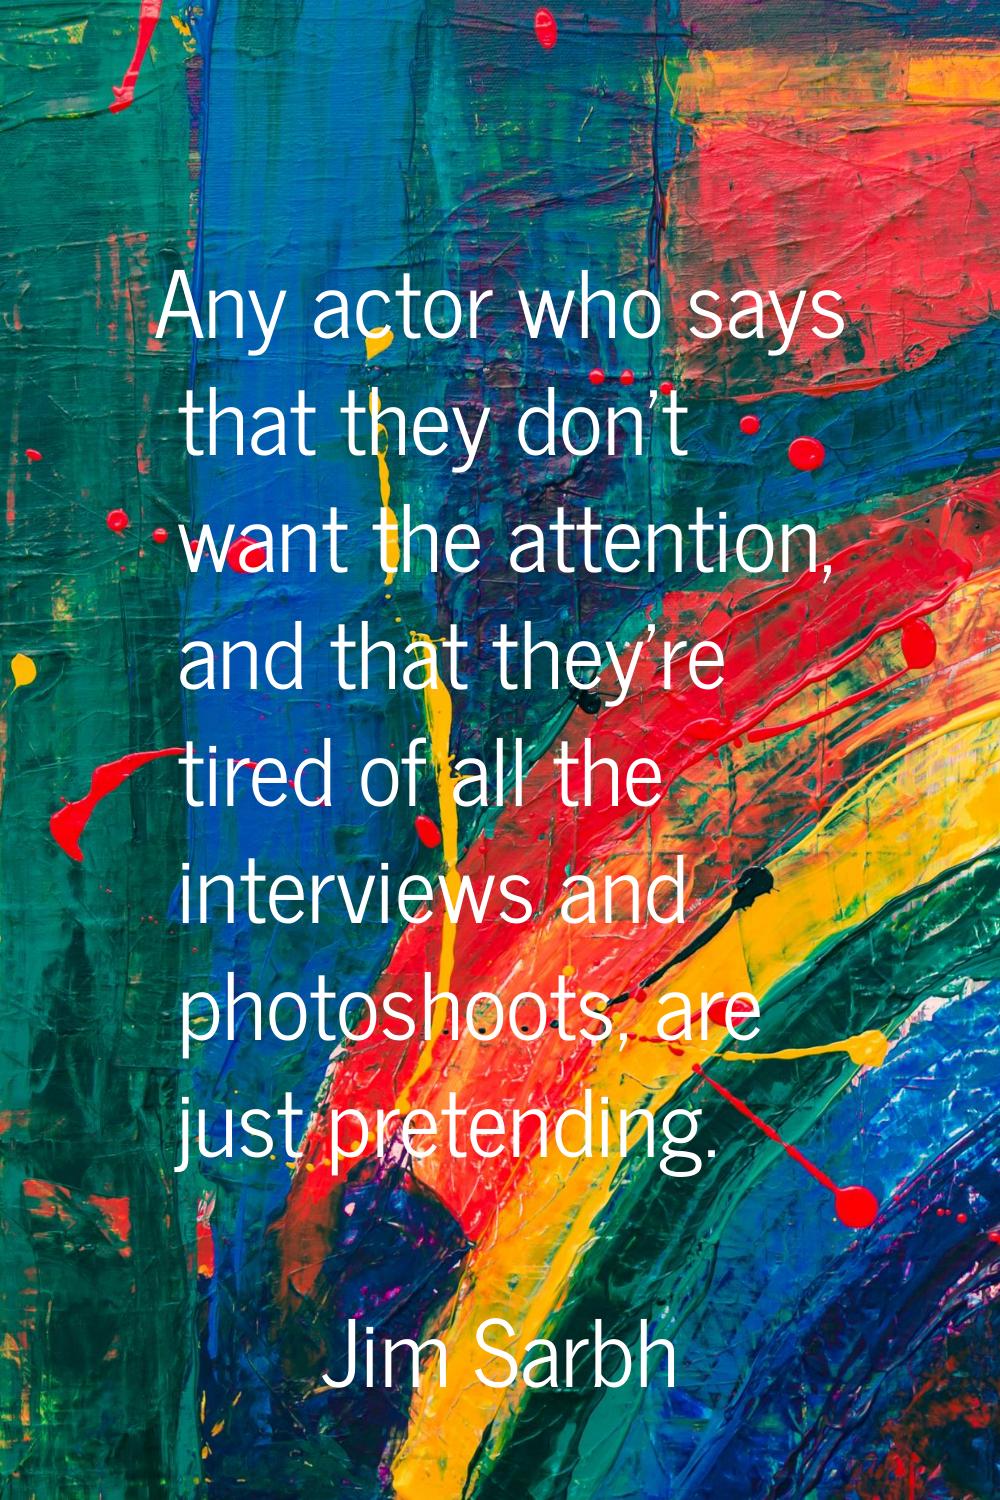 Any actor who says that they don't want the attention, and that they're tired of all the interviews